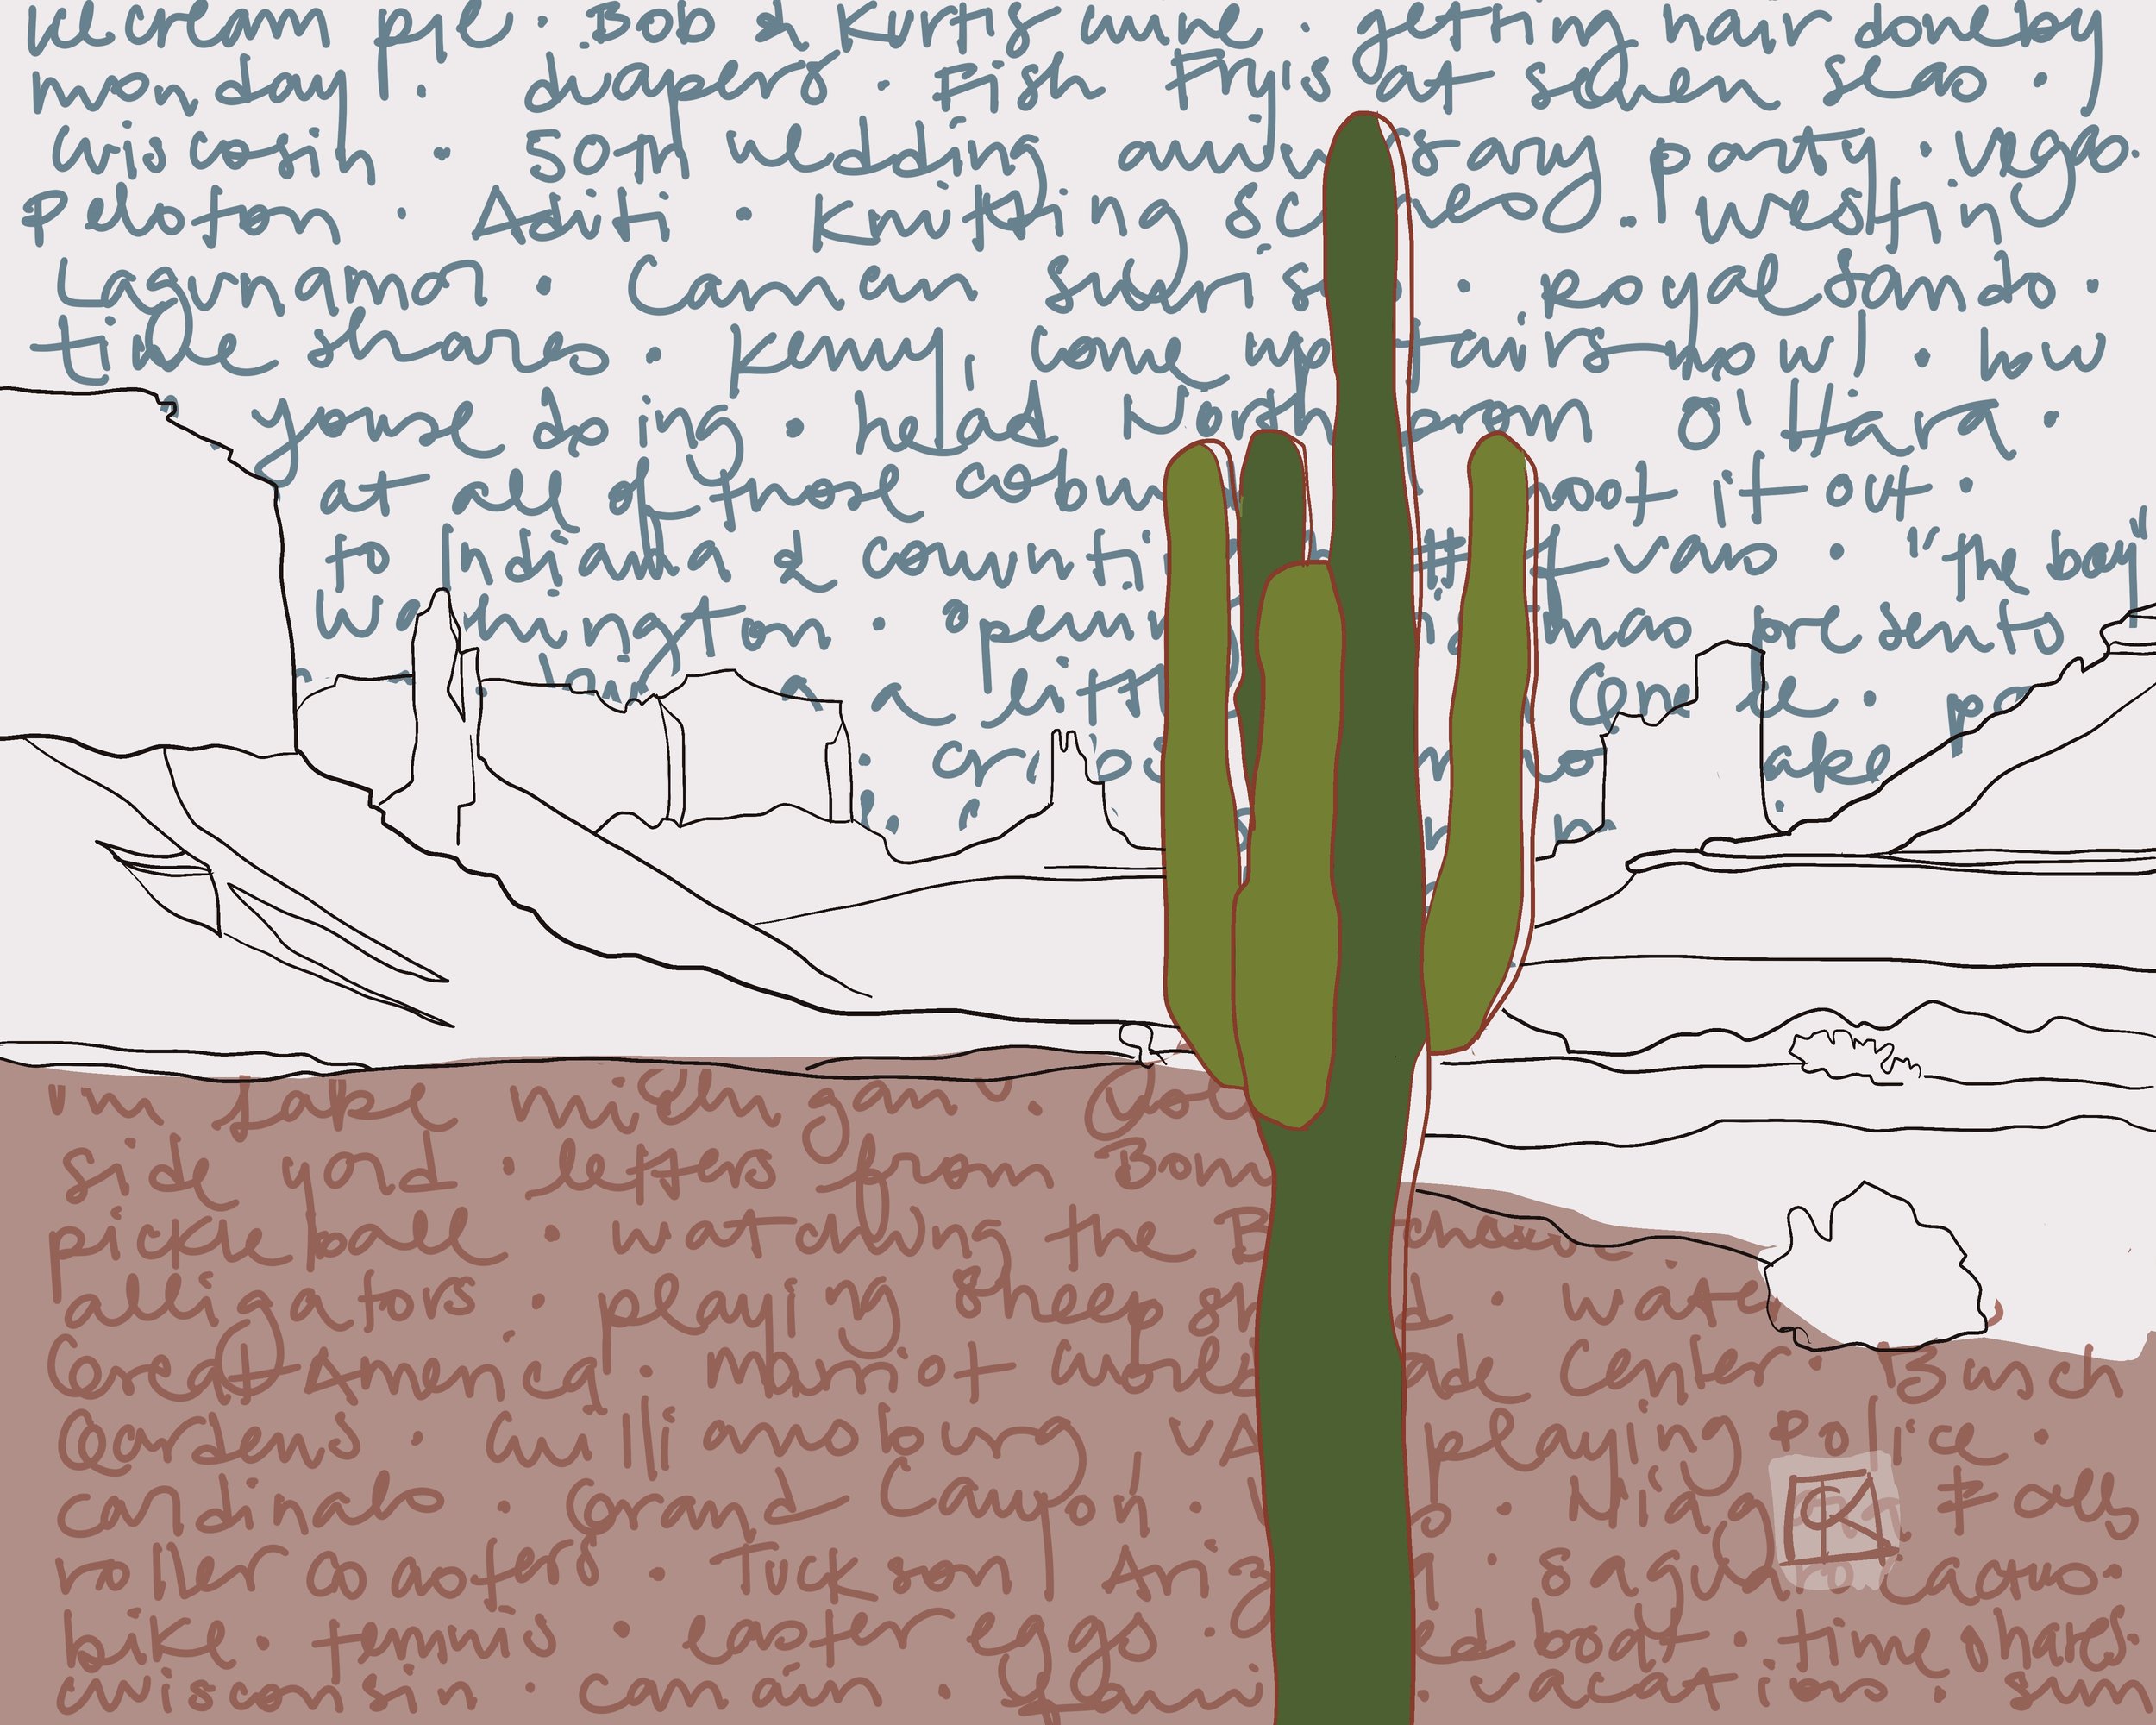 The Saguaro cactus and Arizona landscape with a sky and ground full of memories